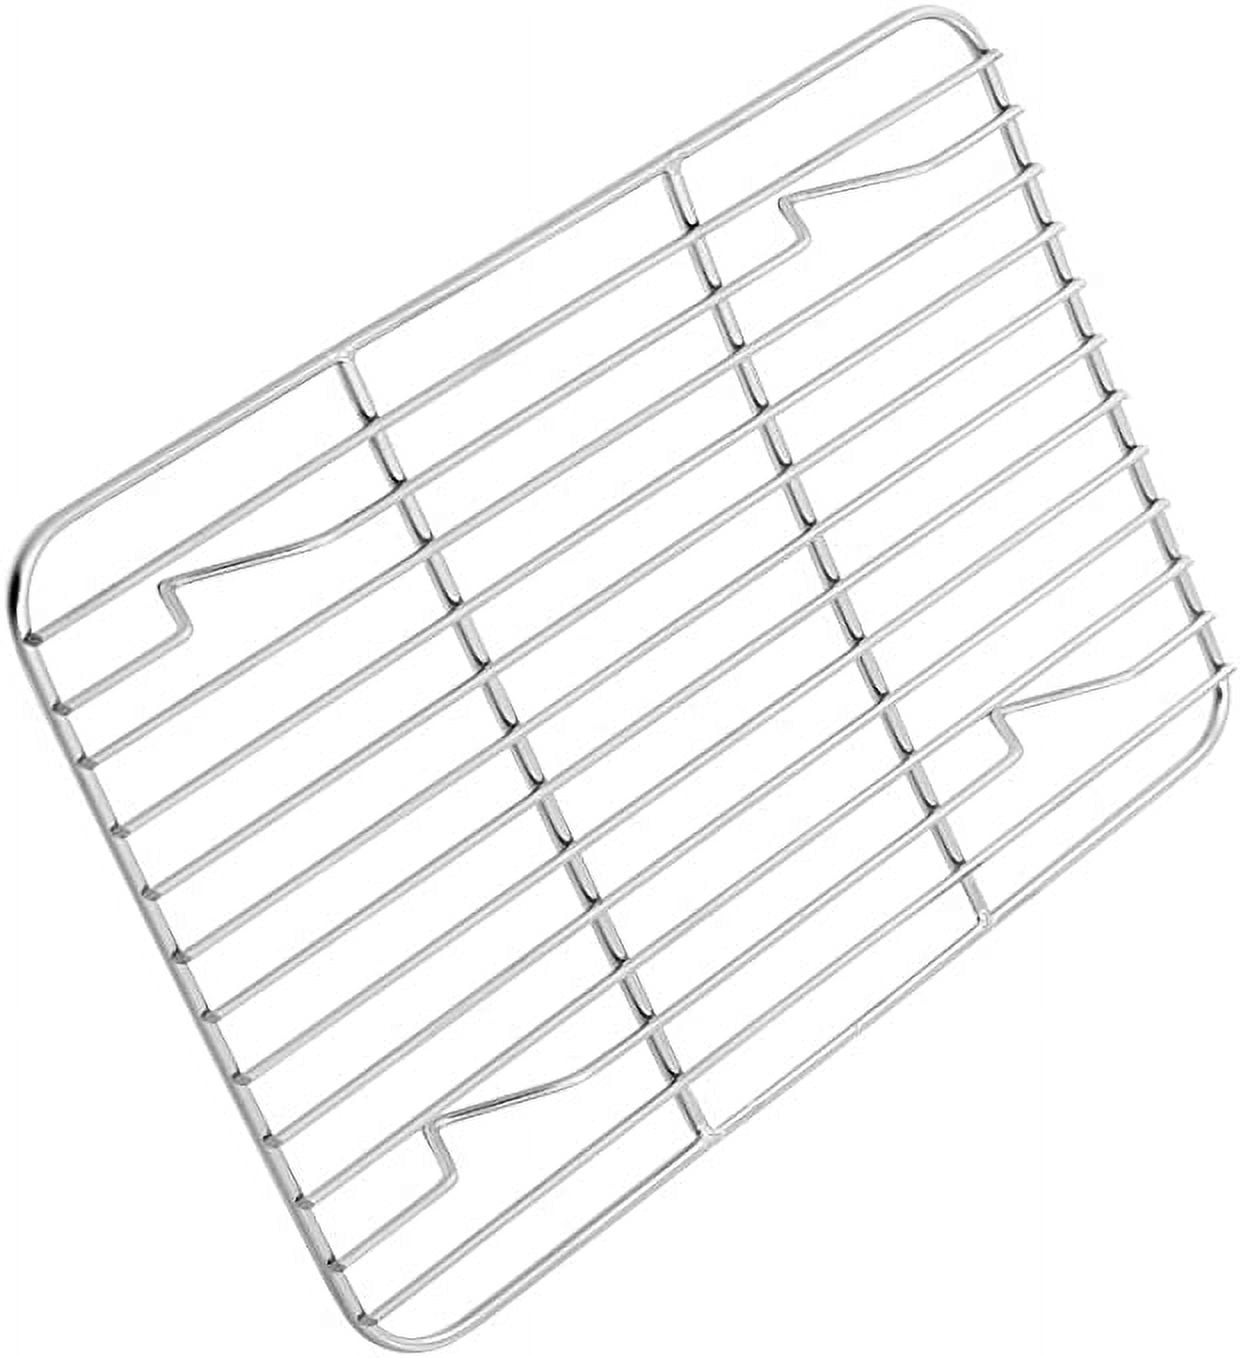 Roofei Baking Sheet with Cooling Rack Set [1 Sheets + 1 Racks], 18 Inch  Stainless Steel Baking Pans Tray Cookie Sheet with Wire Rack for Oven, Non  Toxic, Heavy Duty & Dishwasher